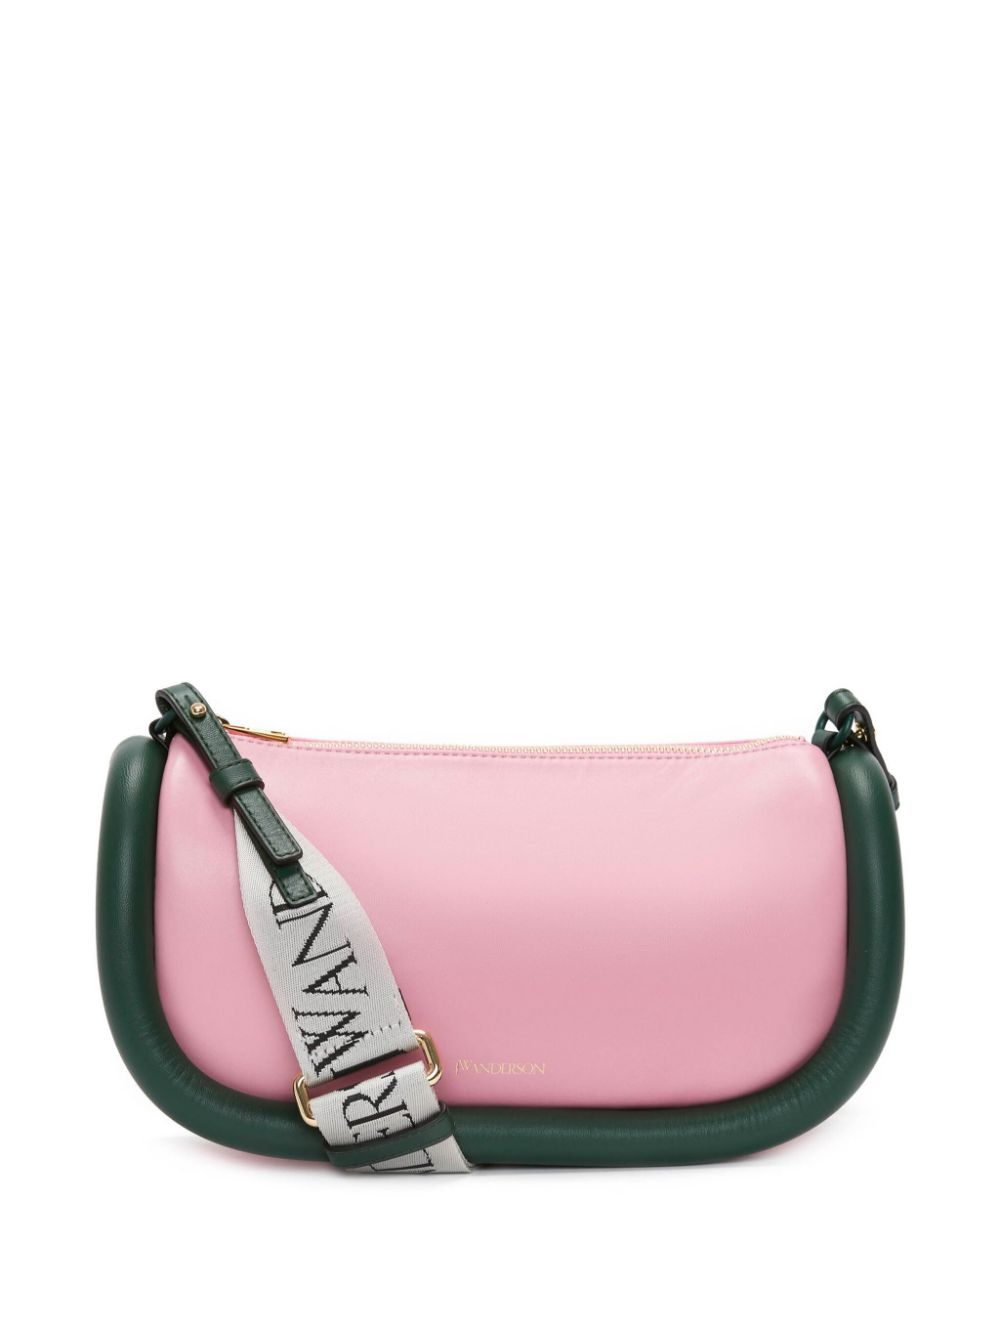 Image 1 of JW Anderson Bumper 15 leather crossbody bag